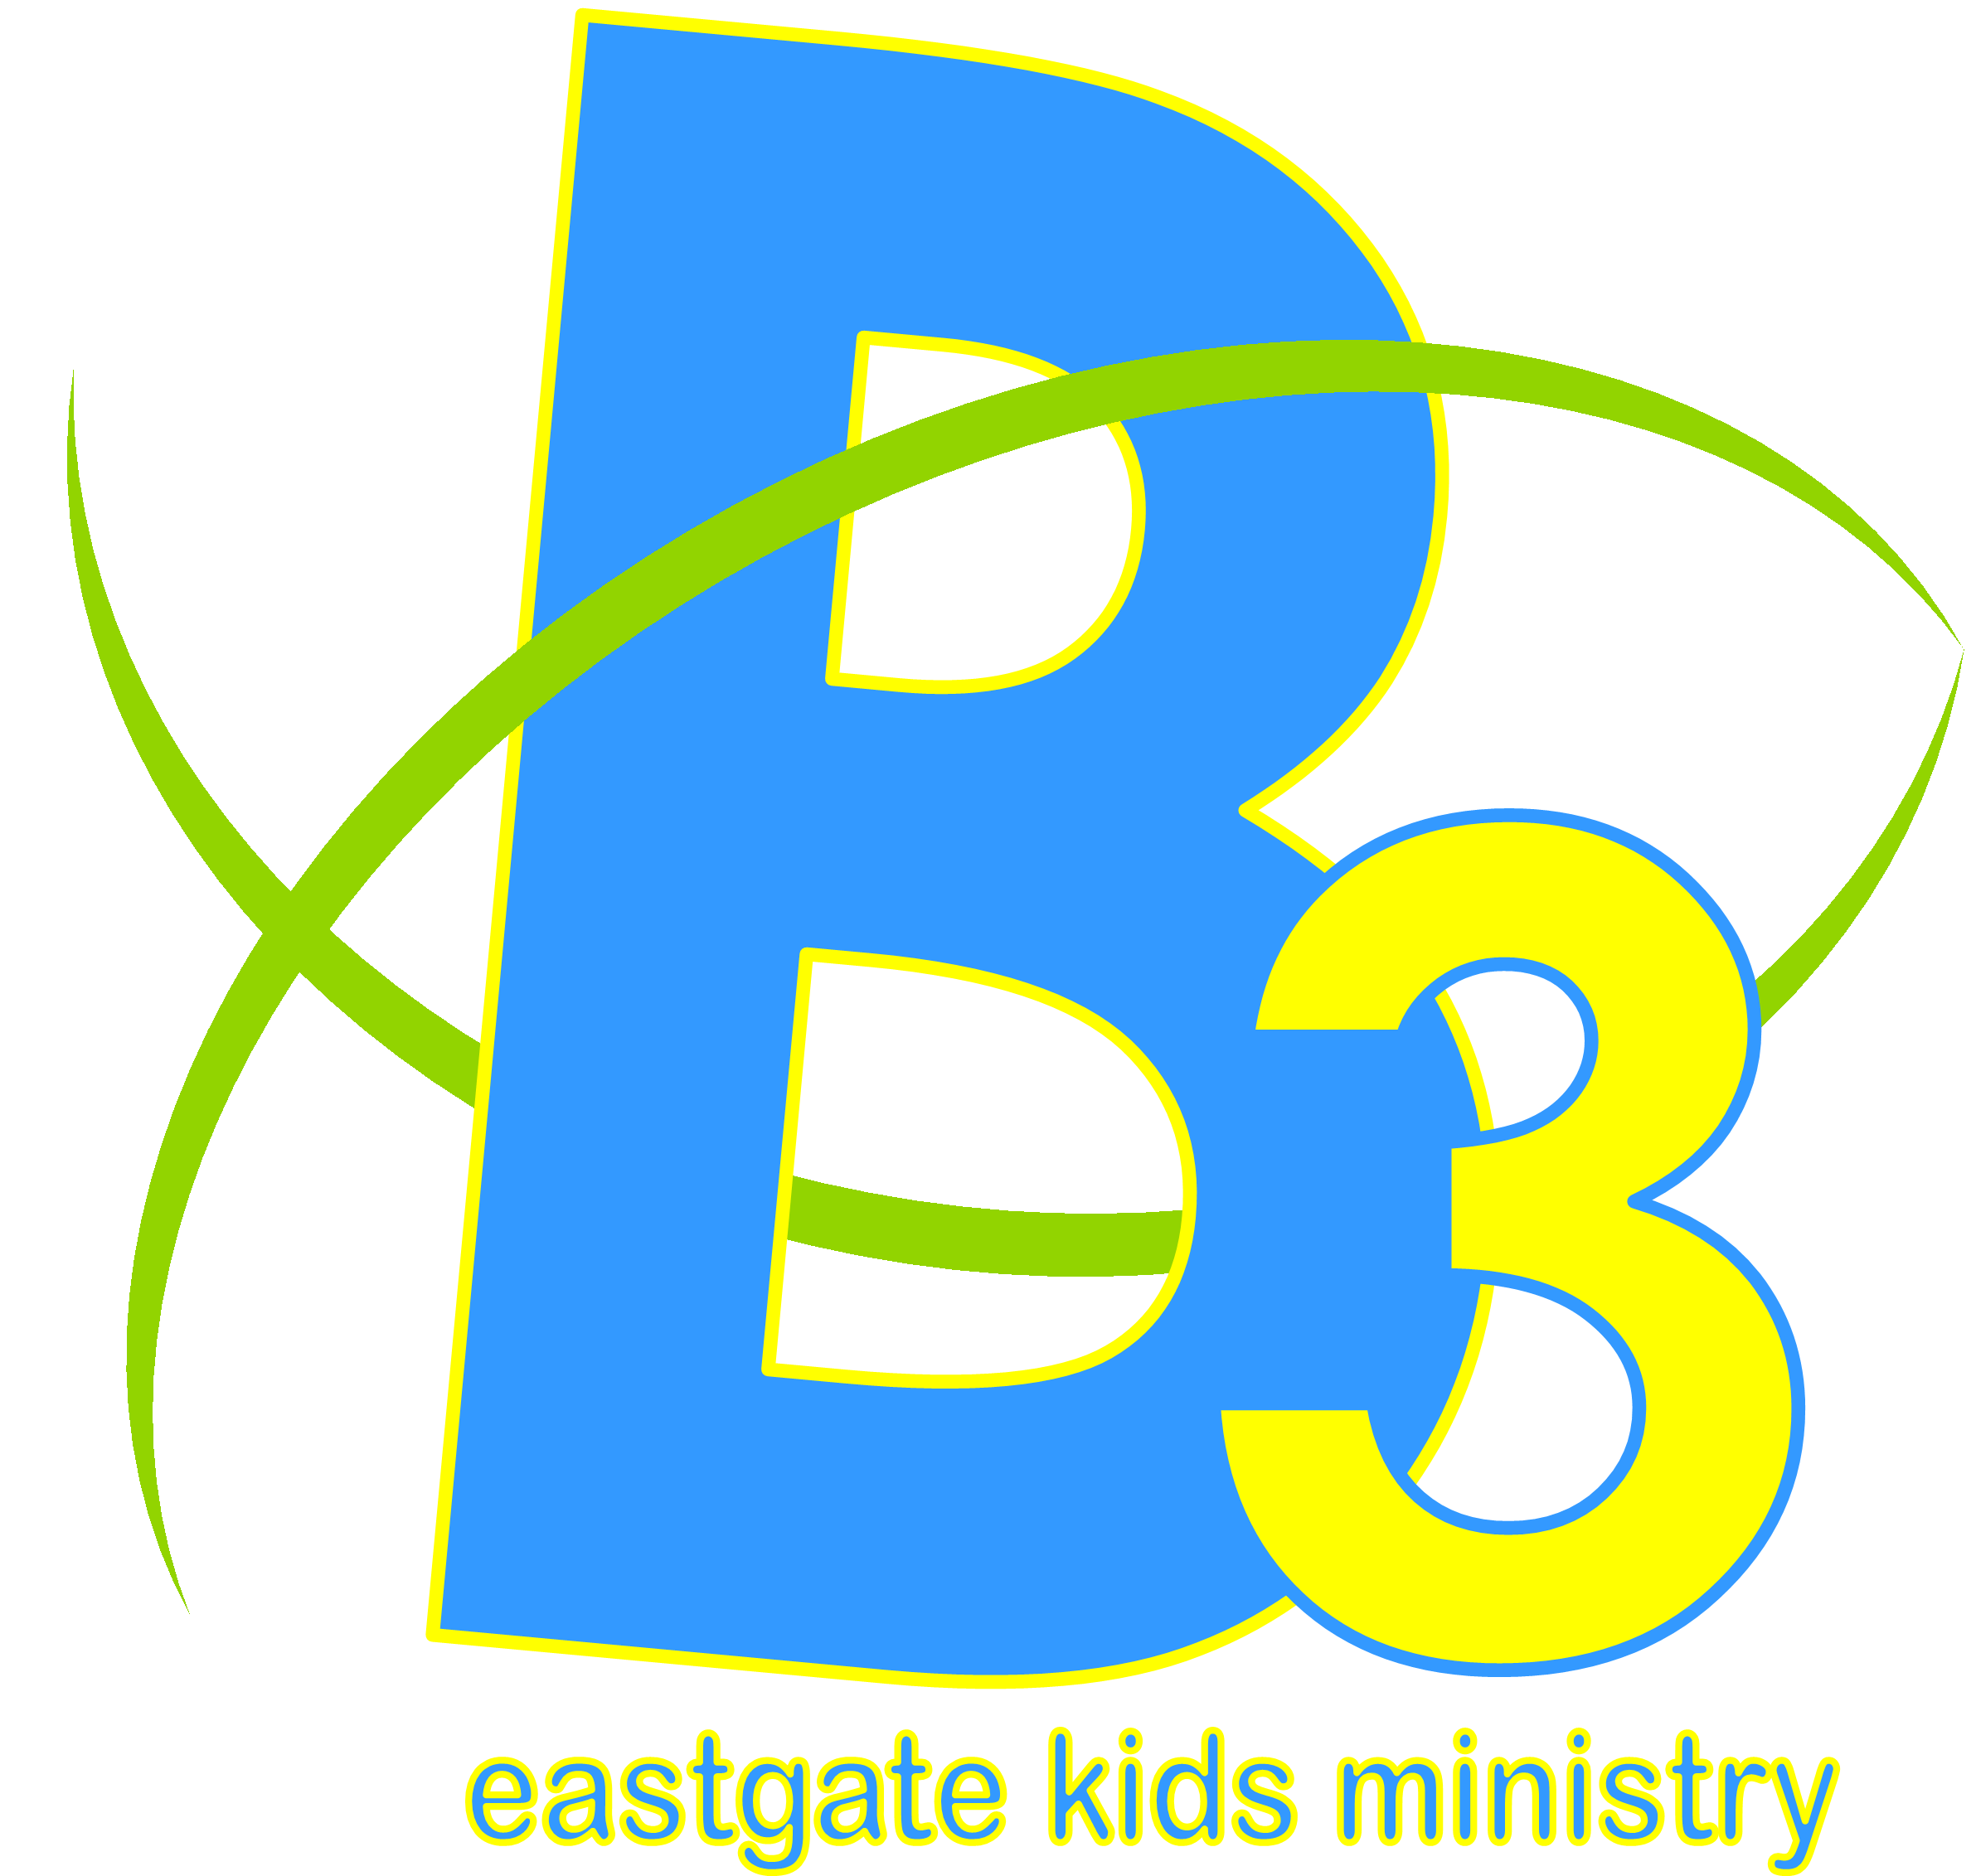 missions clipart baptist